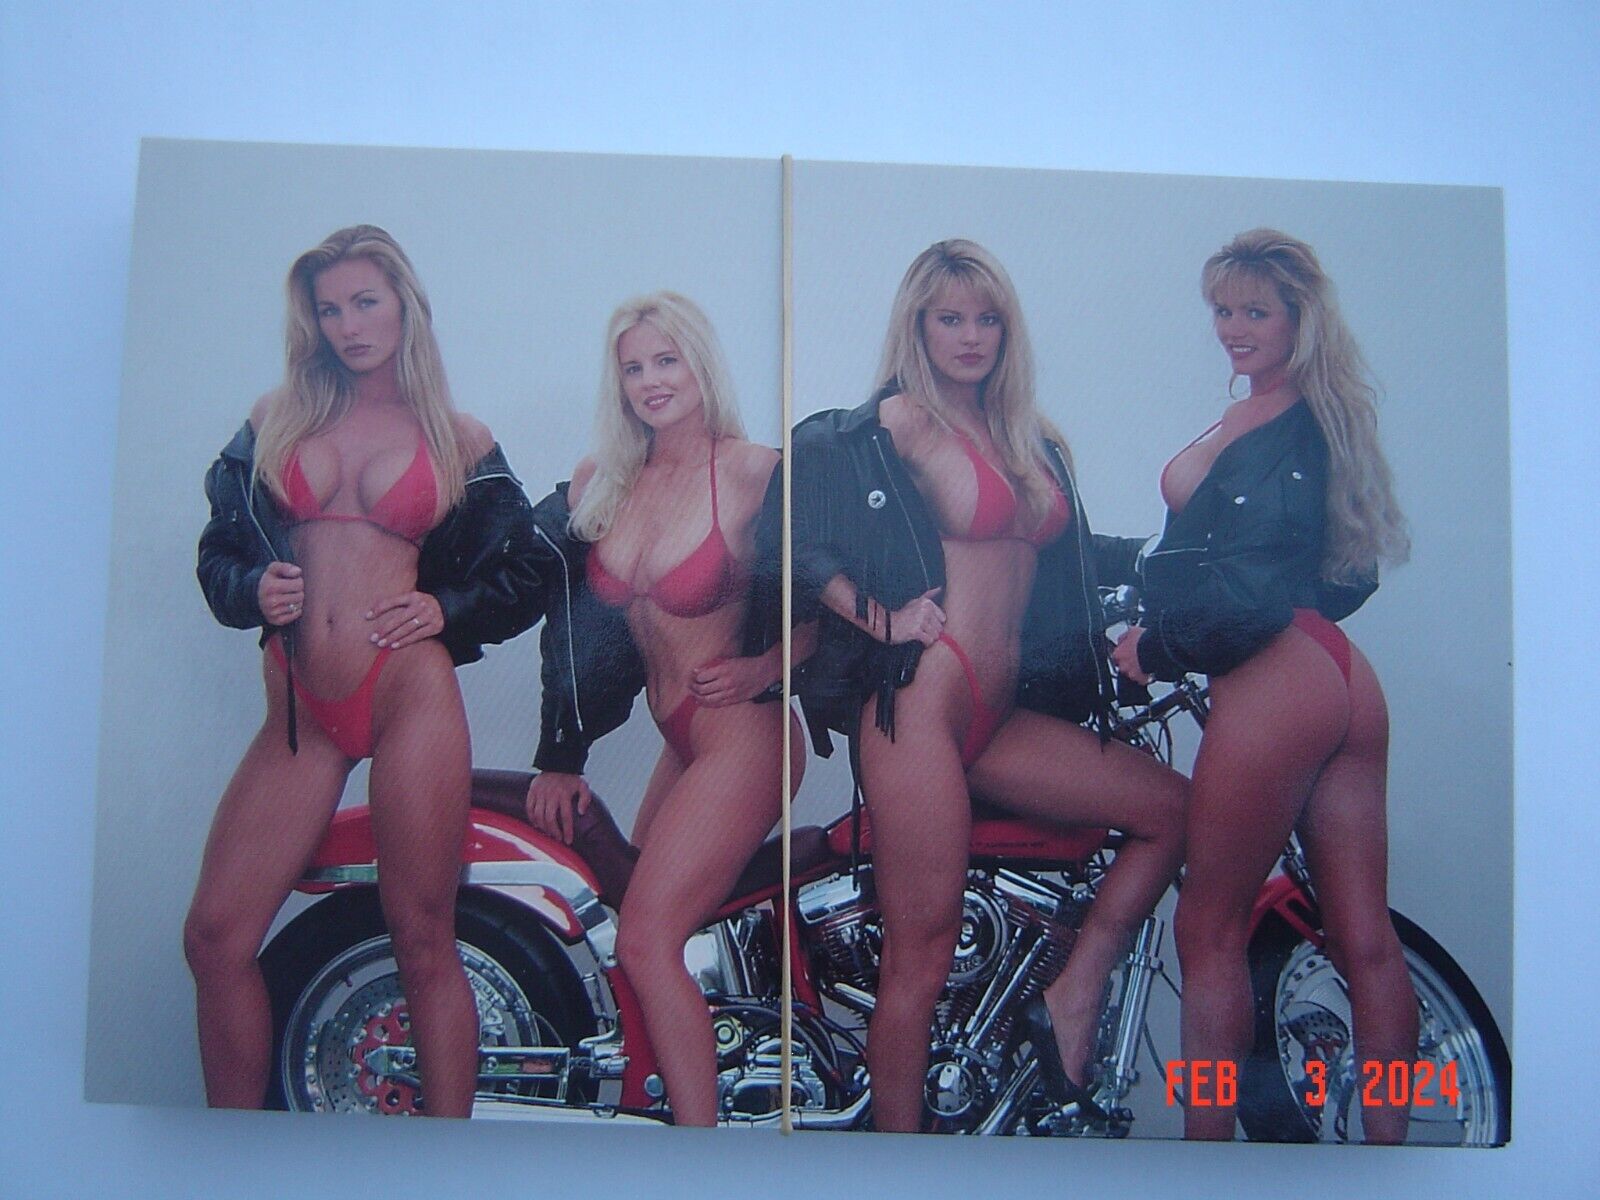 Lot of 10 glossy new Hot Bods Postcards - Sexy Motorcycle Biker Babes in Bikinis